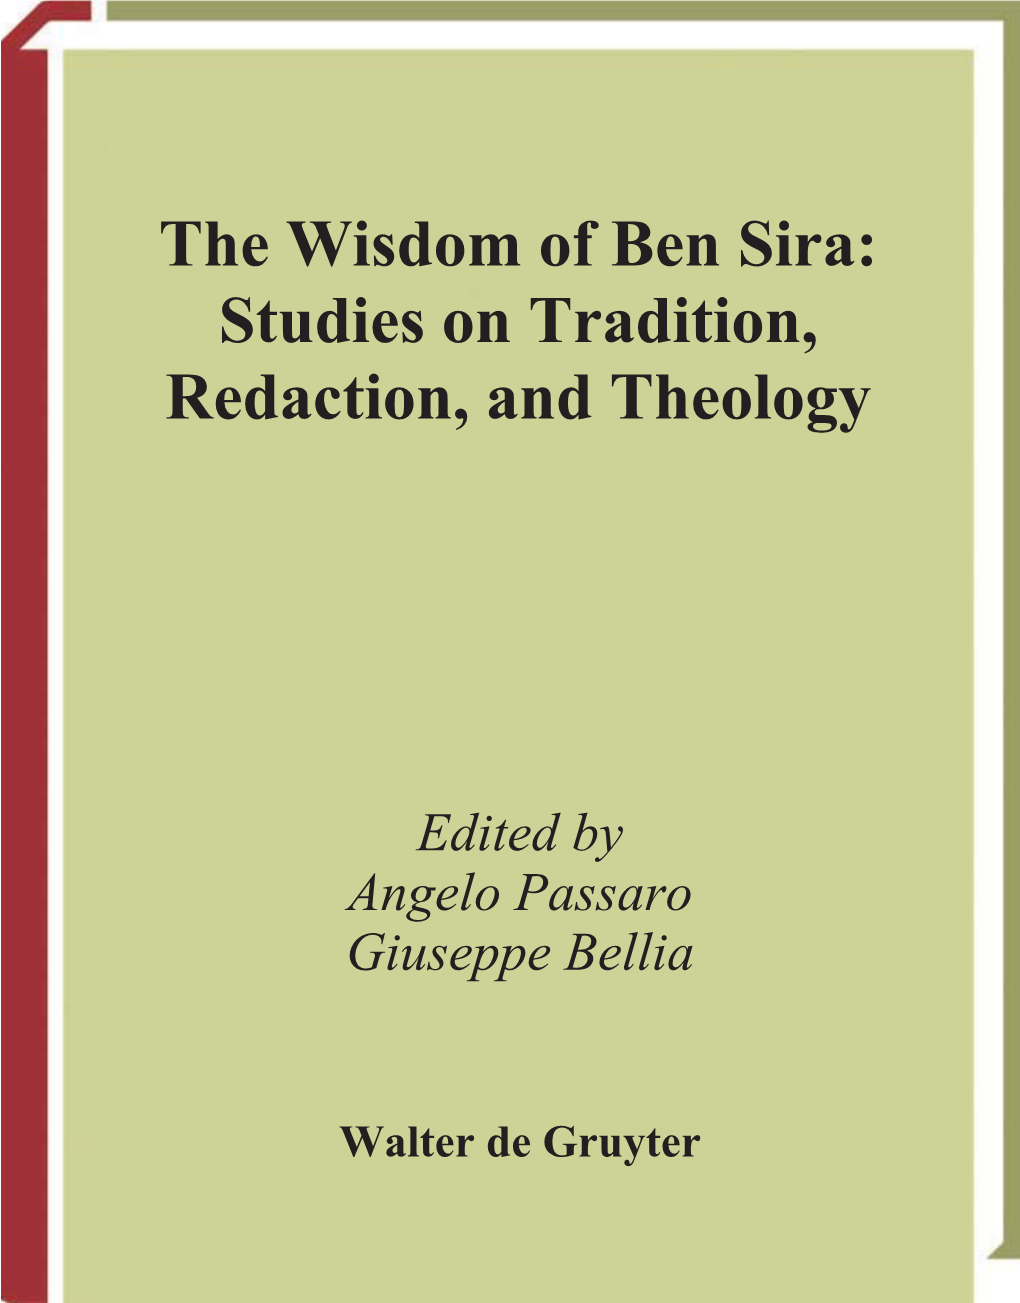 Wisdom of Ben Sira : Studies on Tradition, Redaction, and Theology / Edited by Angelo Passaro and Giuseppe Bellia